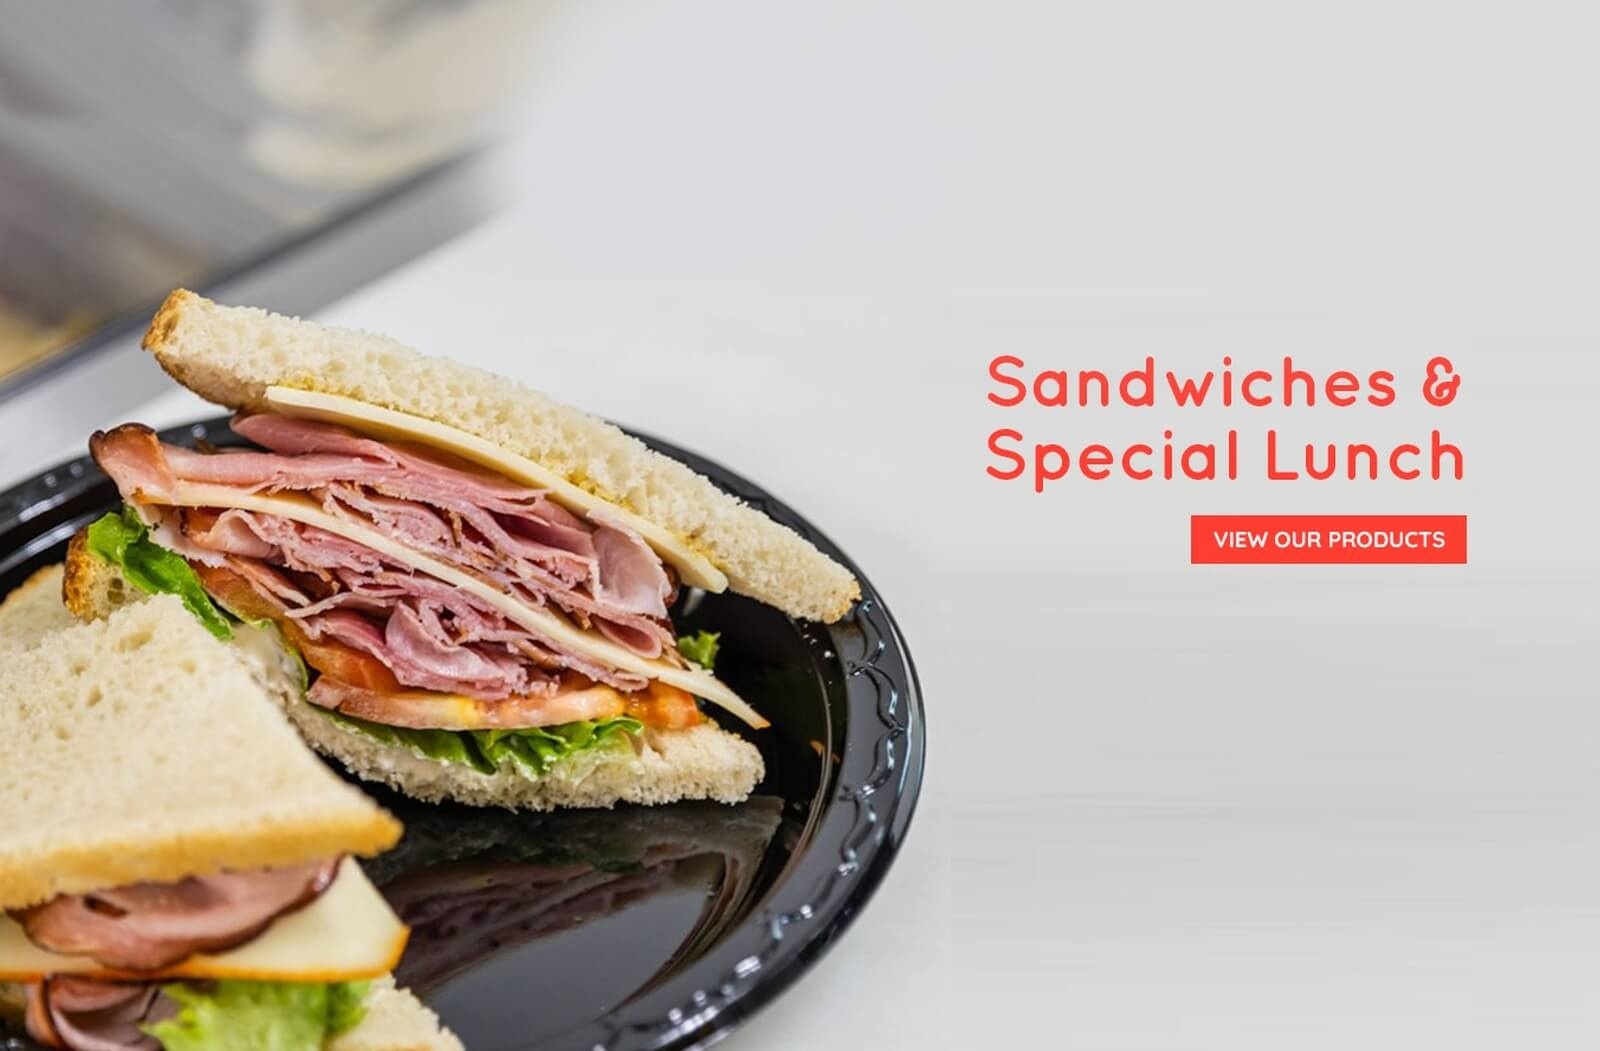 Sandwiches and Special Lunch at Bernhard German Bakery and Deli